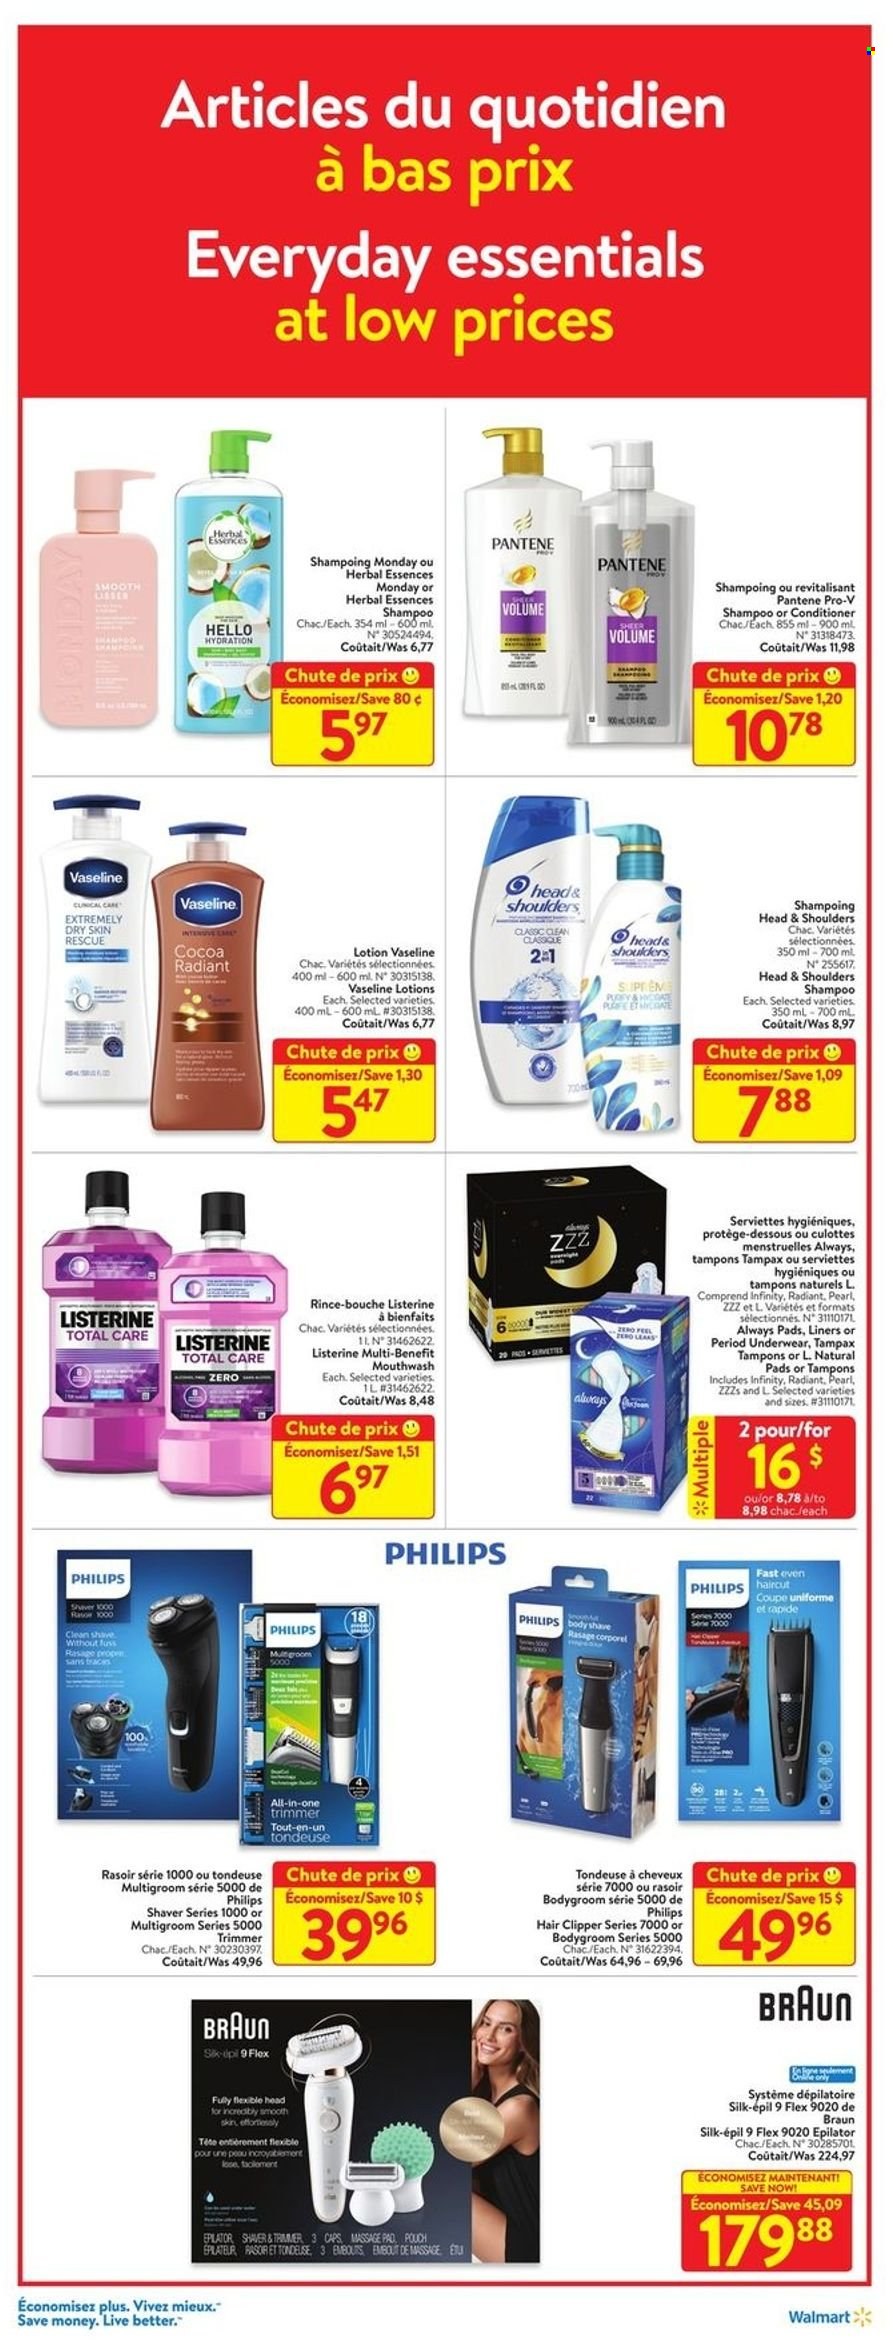 thumbnail - Walmart Flyer - December 02, 2021 - December 08, 2021 - Sales products - Philips, Silk, Vaseline, mouthwash, Always pads, tampons, Infinity, conditioner, Herbal Essences, body lotion, shaver, trimmer, oven, epilator, Silk-épil, hair clipper, cap, Braun, Listerine, shampoo, Tampax, Head & Shoulders, Pantene. Page 14.